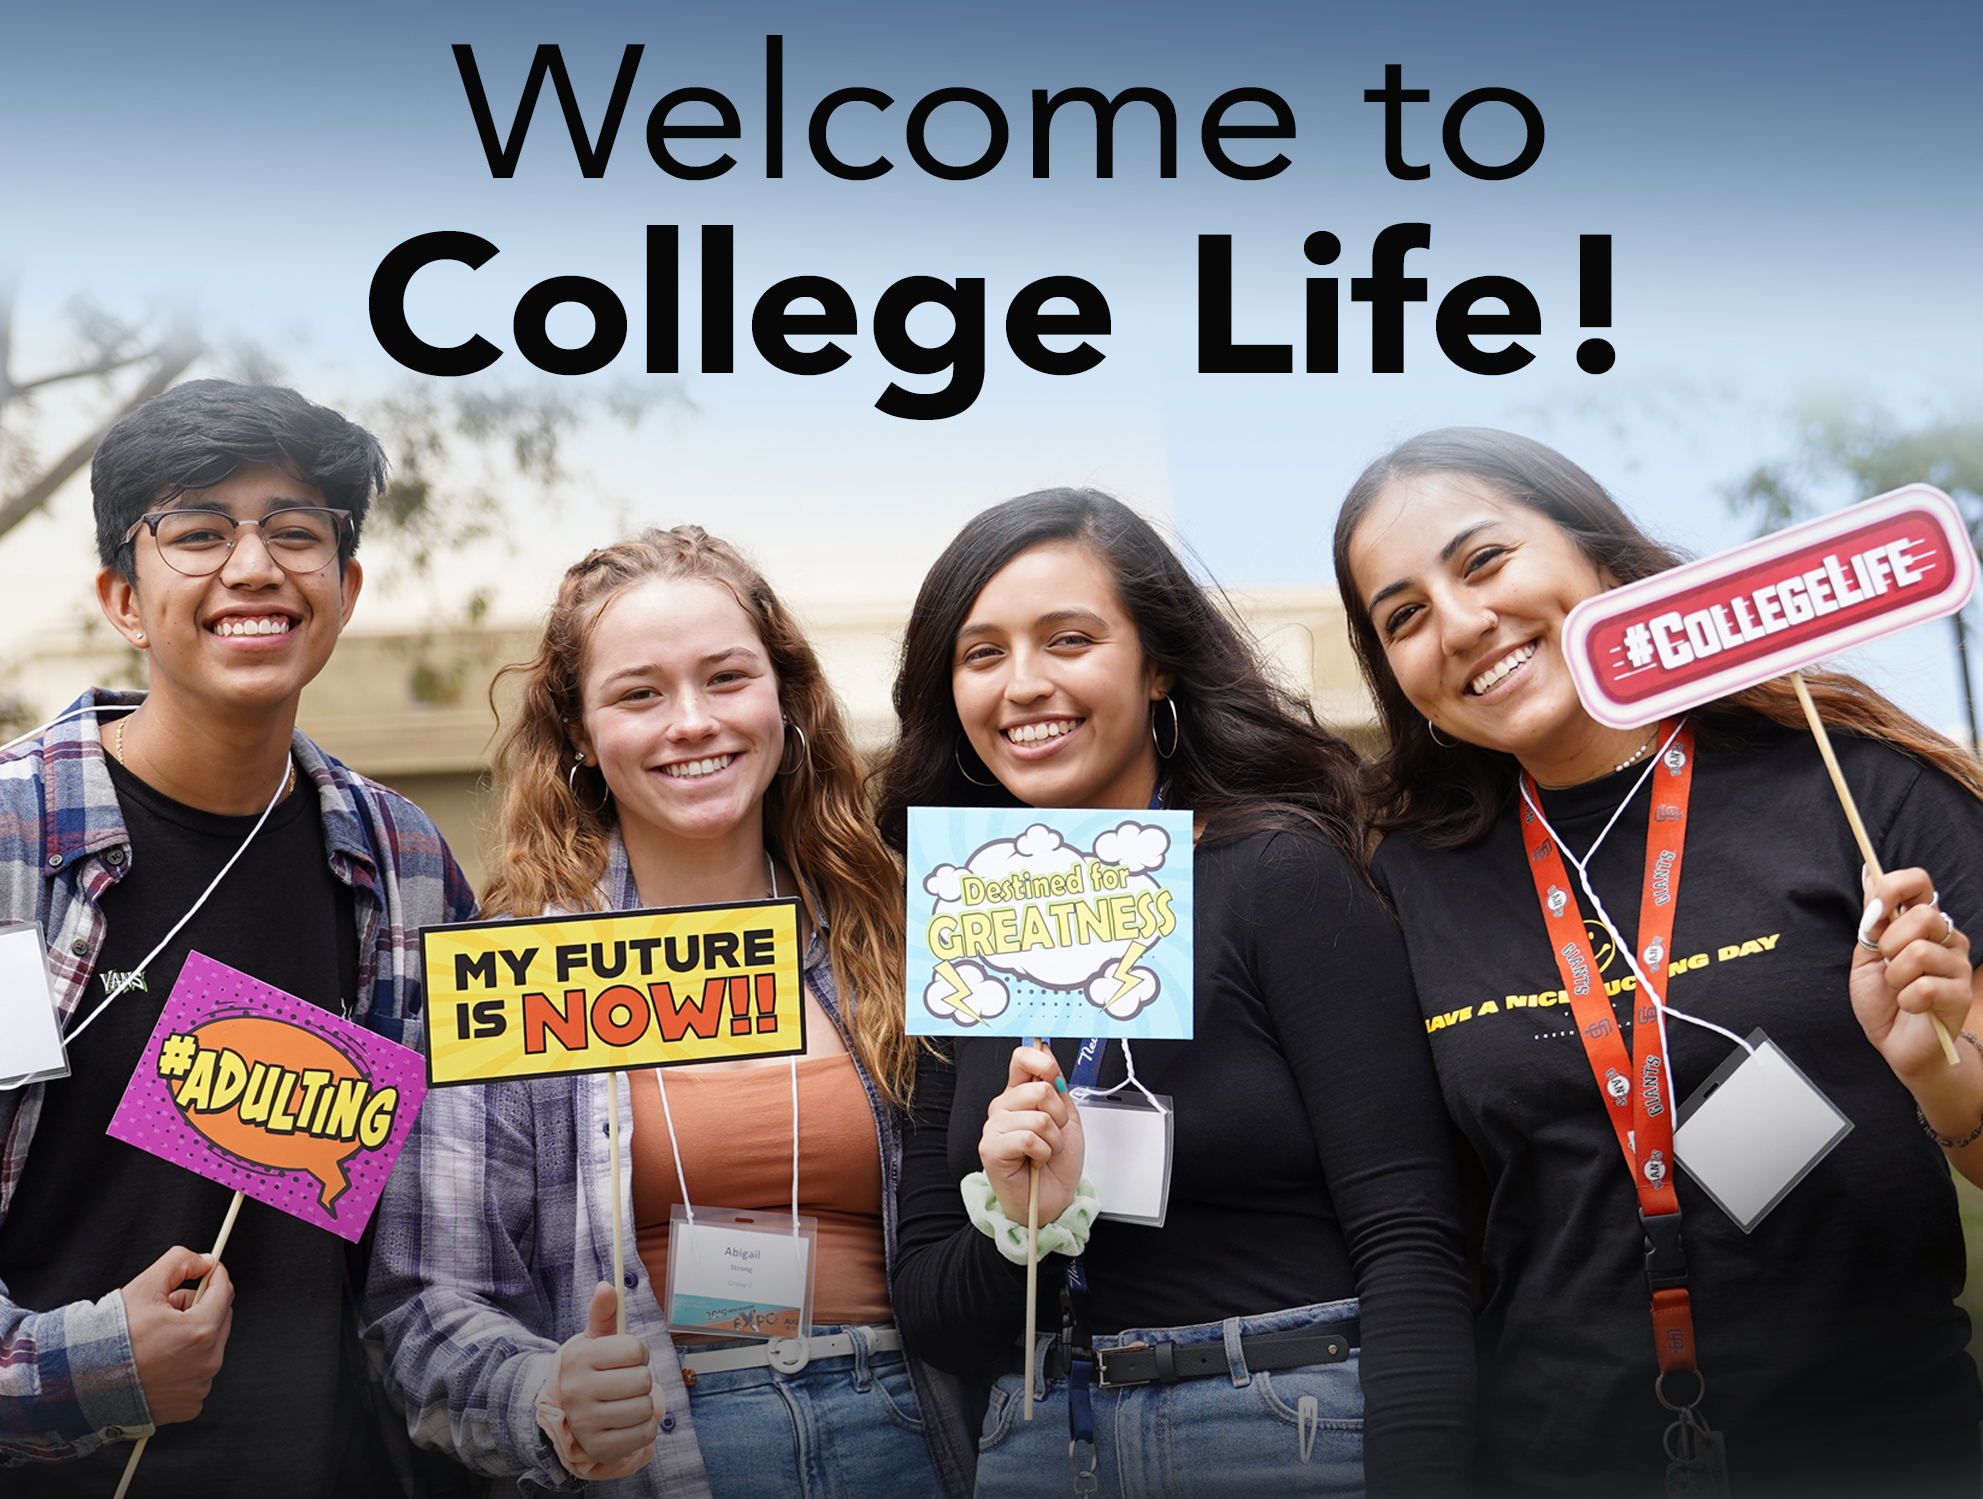 4921-welcome-to-college-life-bitly-aug-19-sm-copy.jpeg